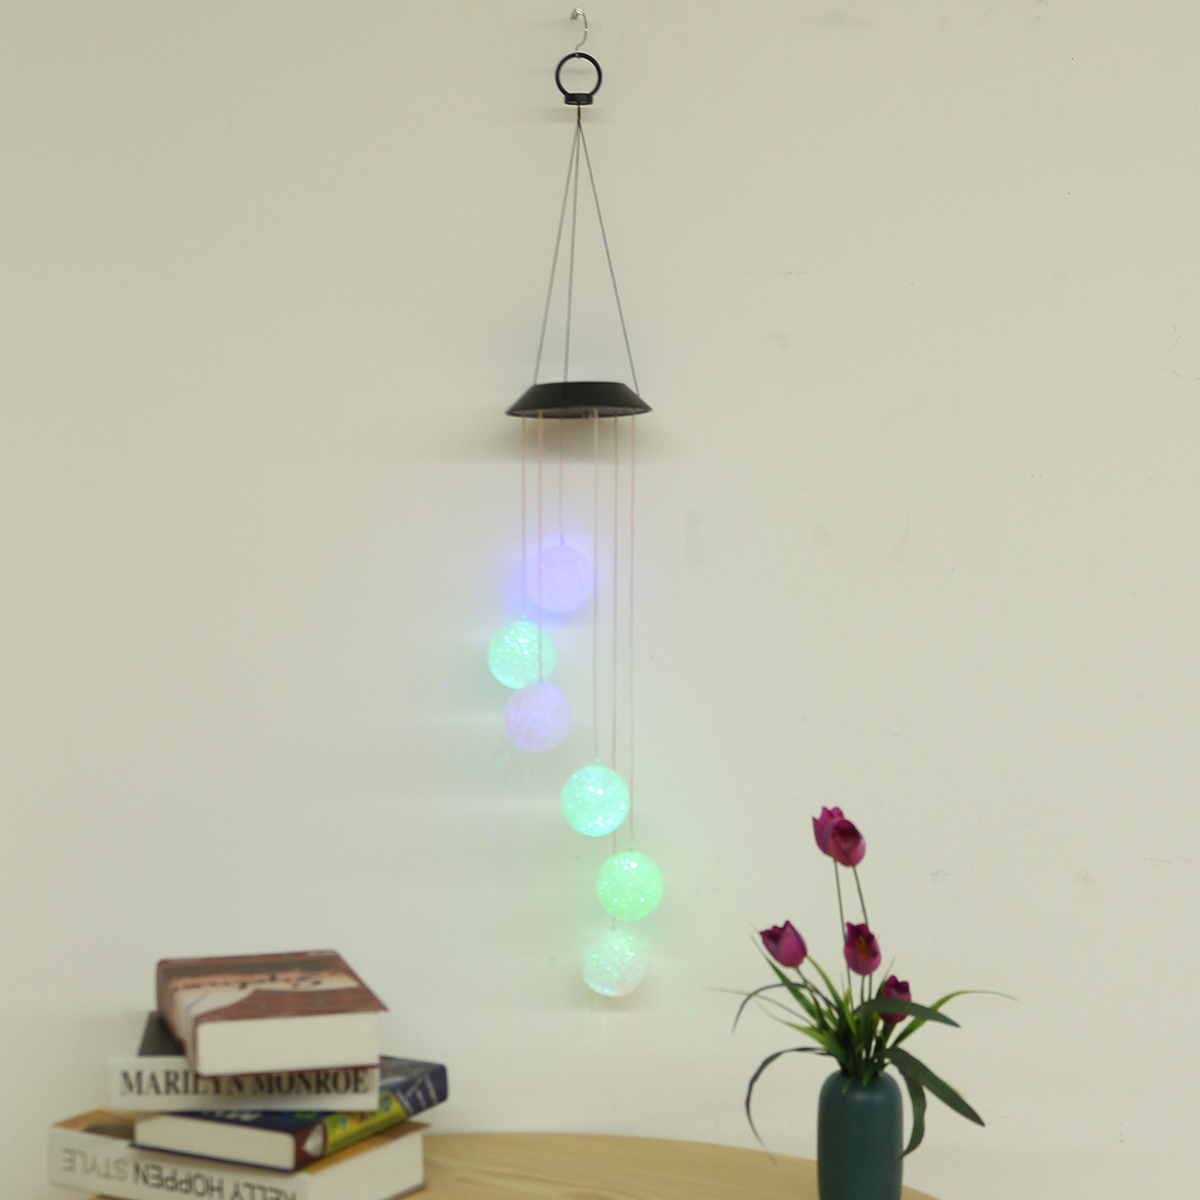 Aeolian-Hanging-Wind-Solar-LED-Lights-Chimes-Powered-String-Lawn-Garden-Lamp-1642749-6